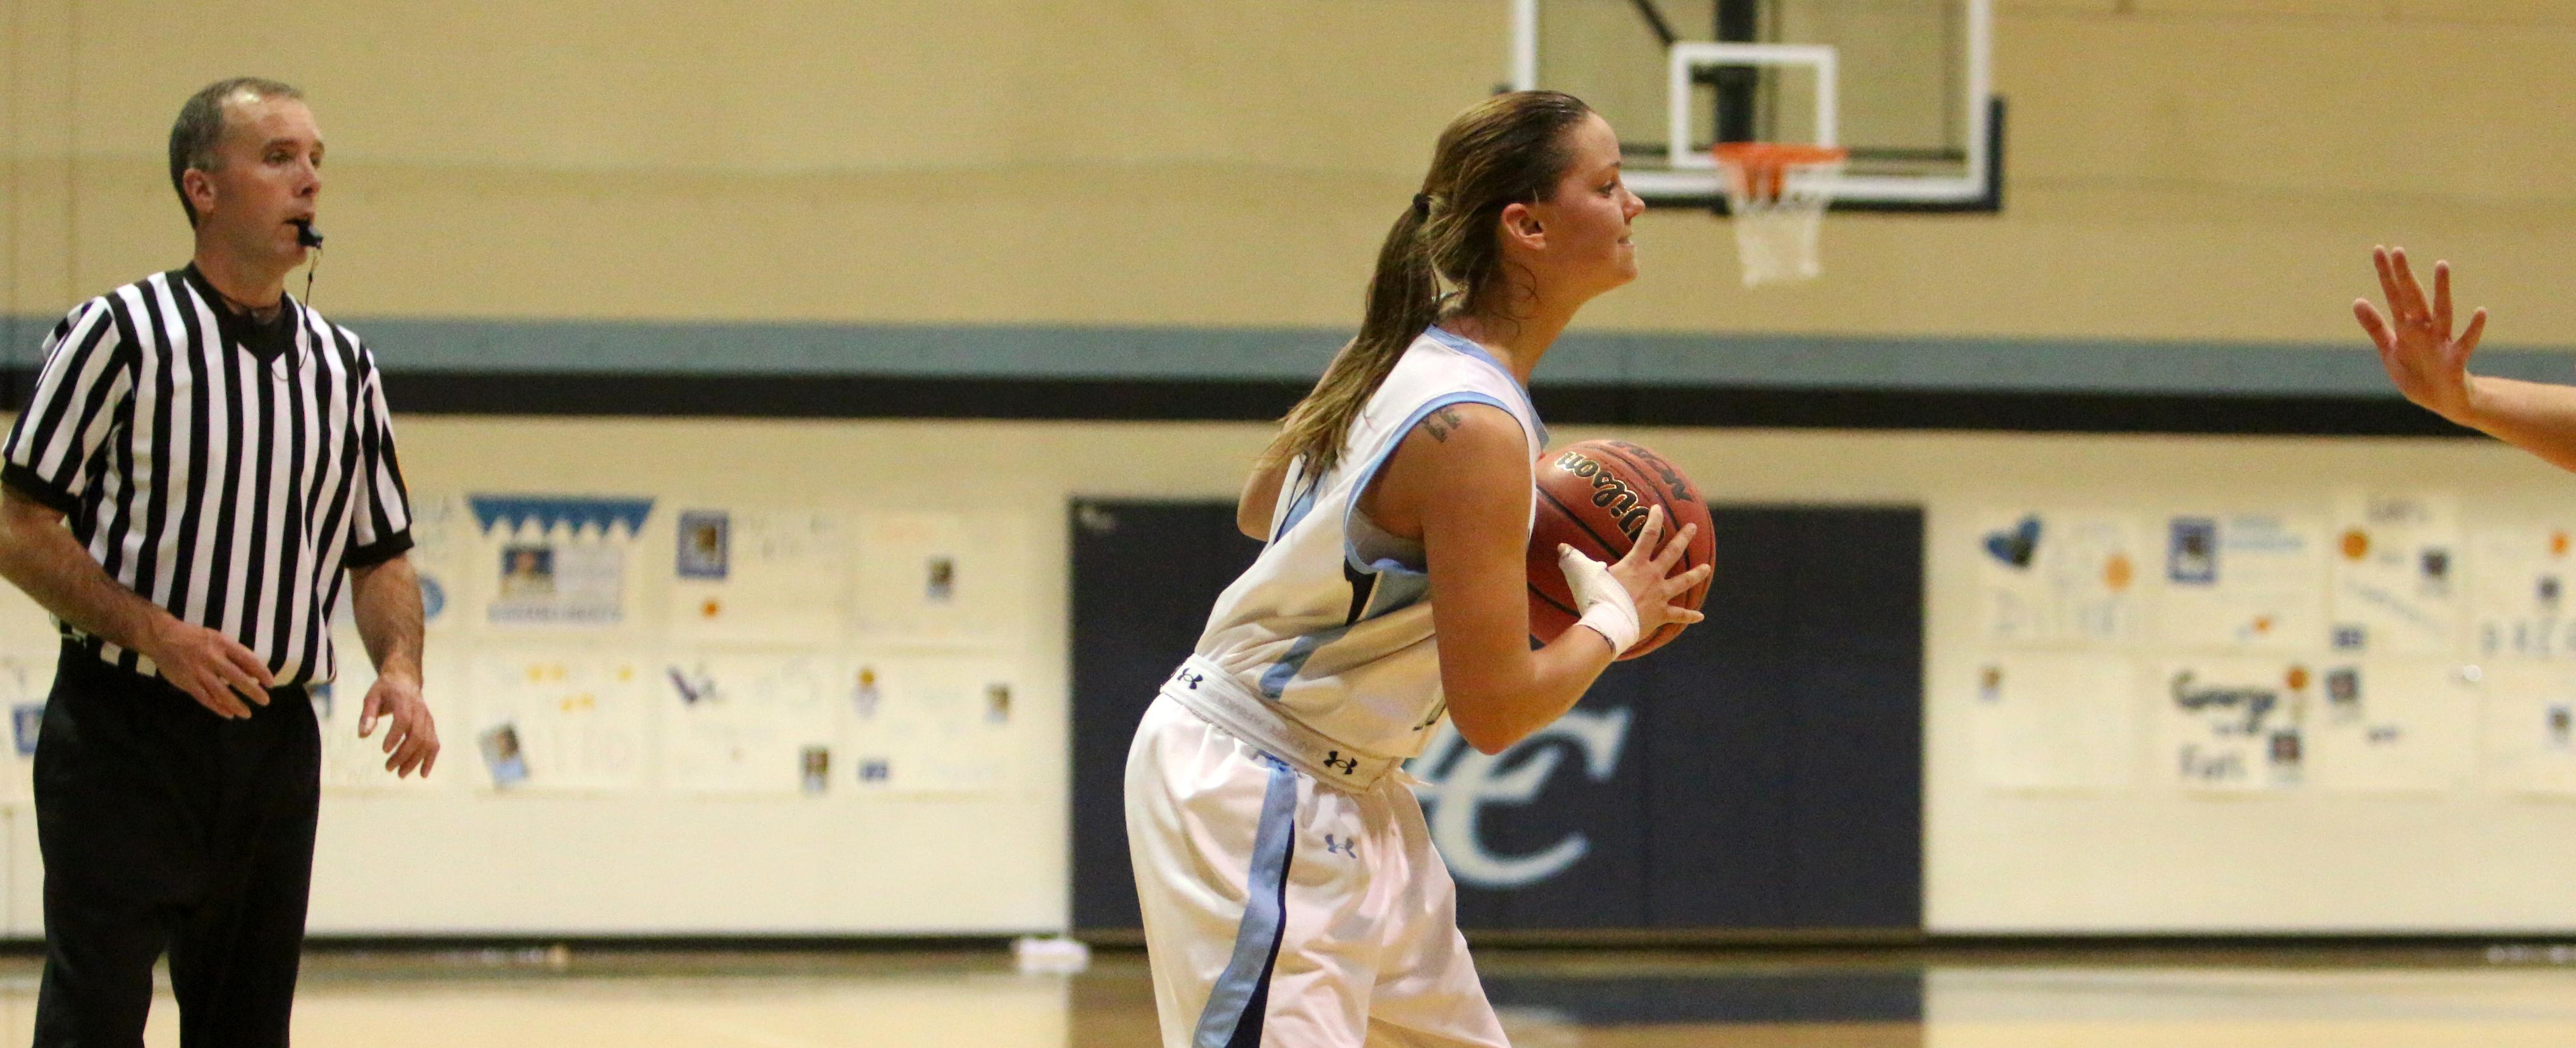 Suffolk's Campellone Pours in 43 Points to Down Women's Basketball 85-63